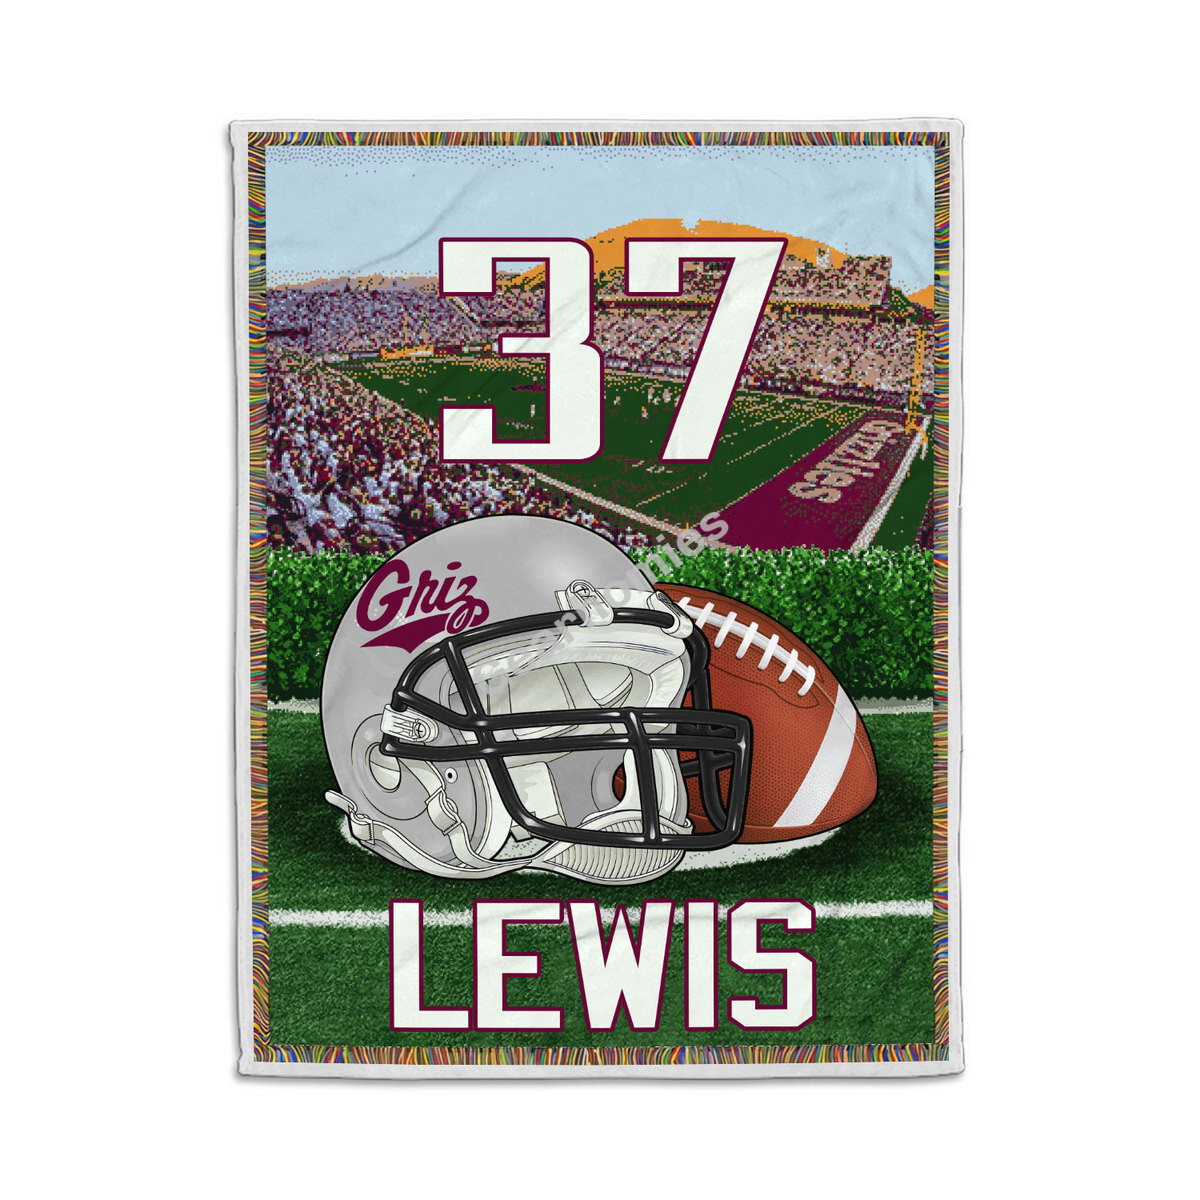 Personalized Name And Number Montana Grizzlies Football Blanket Team